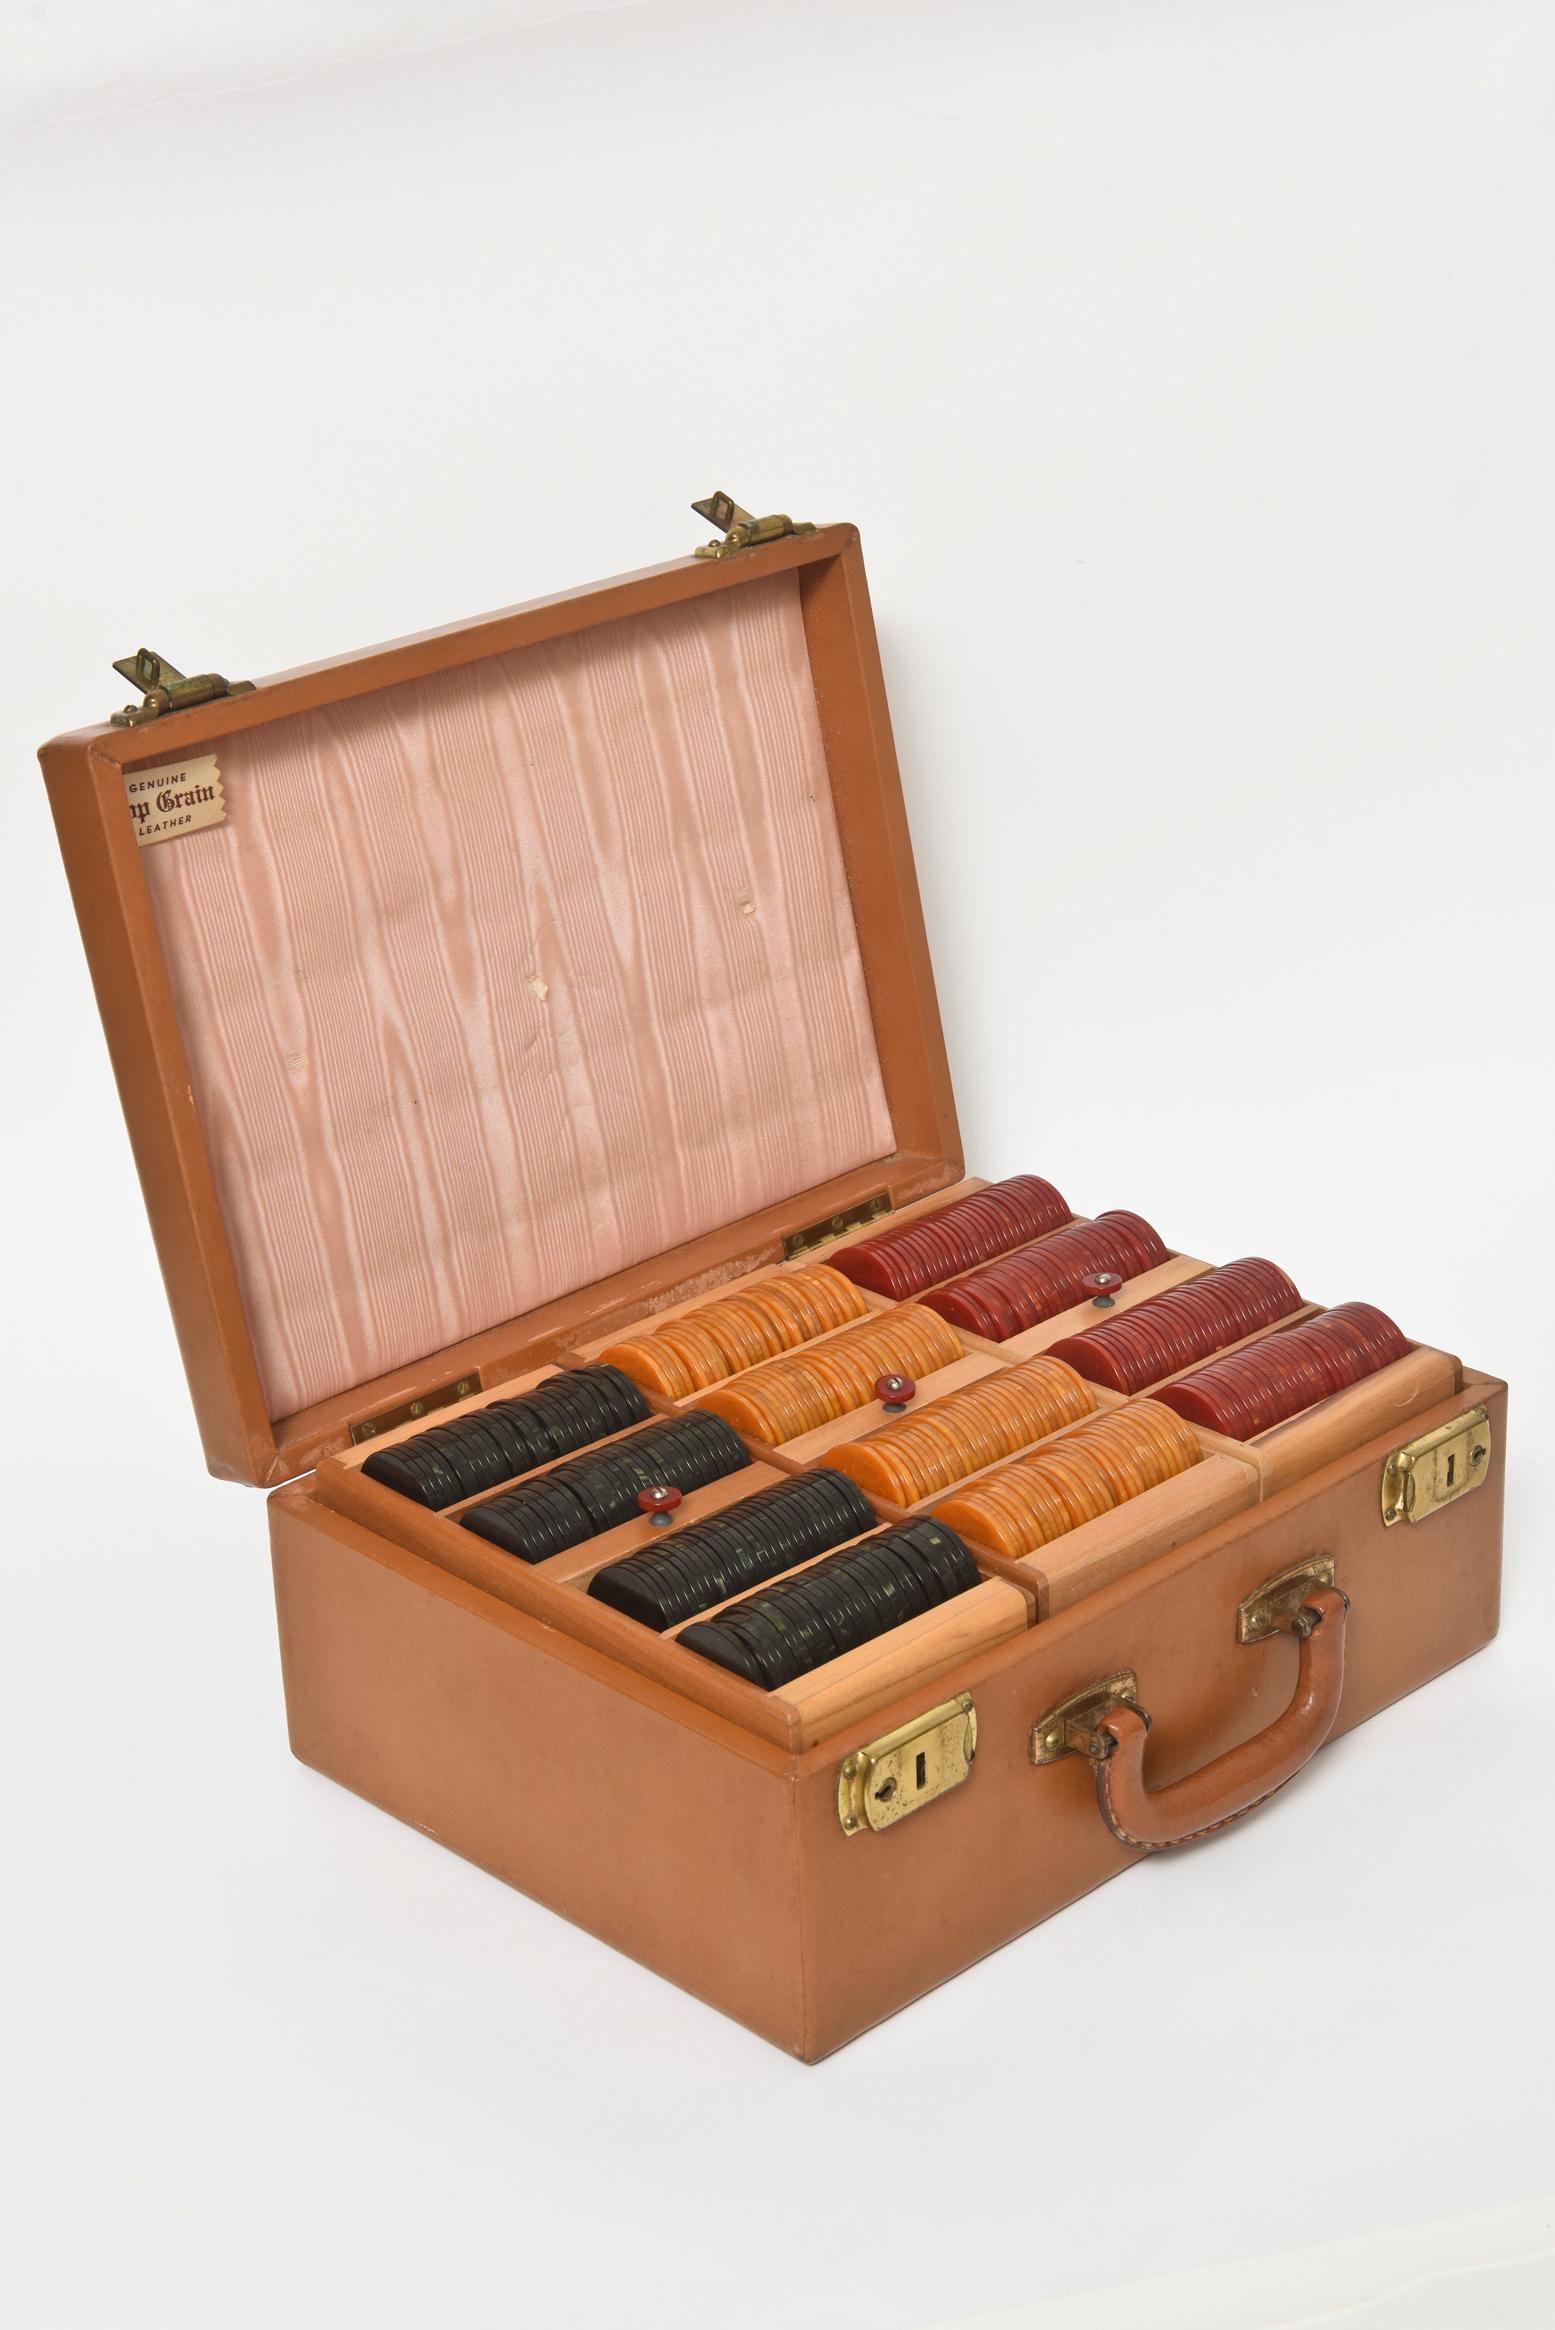 This is a magnificent 1930s two-tier travel poker set includes 6 removable wood chip rack holders that each have 4 sections. They lift out of the case with a bakelite knobs. The set has the original leather case with 2 hinged locks, the original key